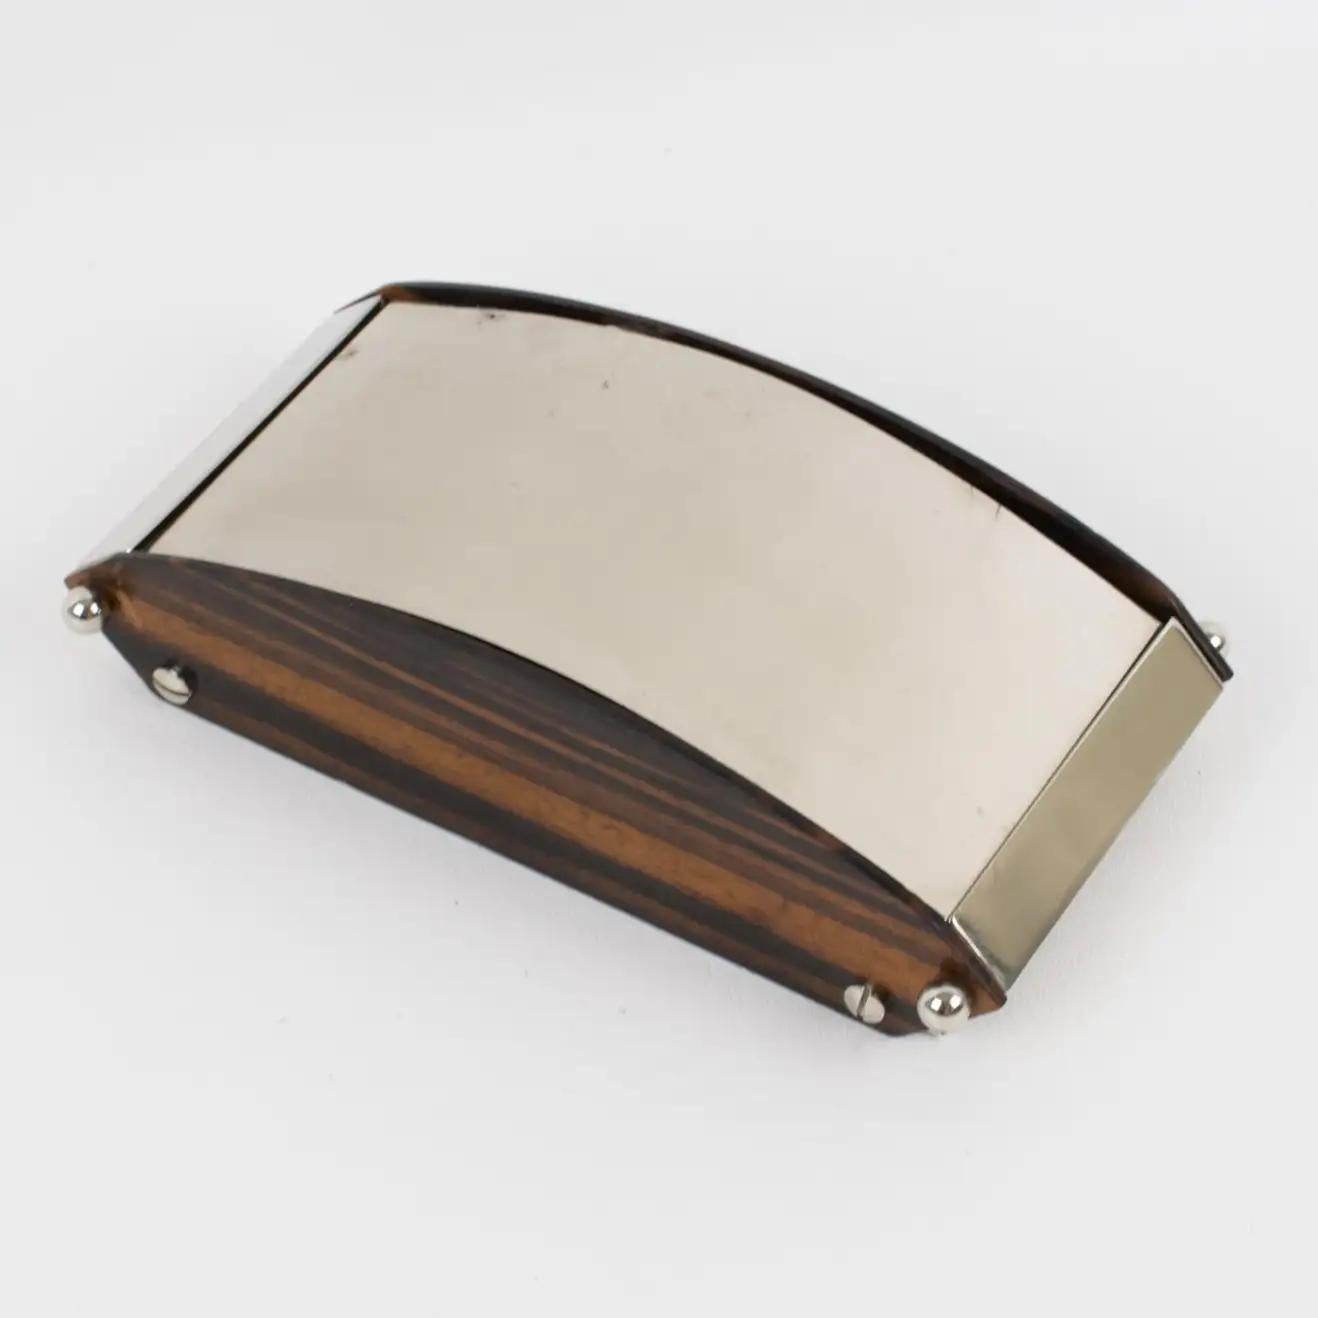 Mid-20th Century Maison Desny Style Art Deco Box Macassar Wood and Chrome, France 1930s For Sale